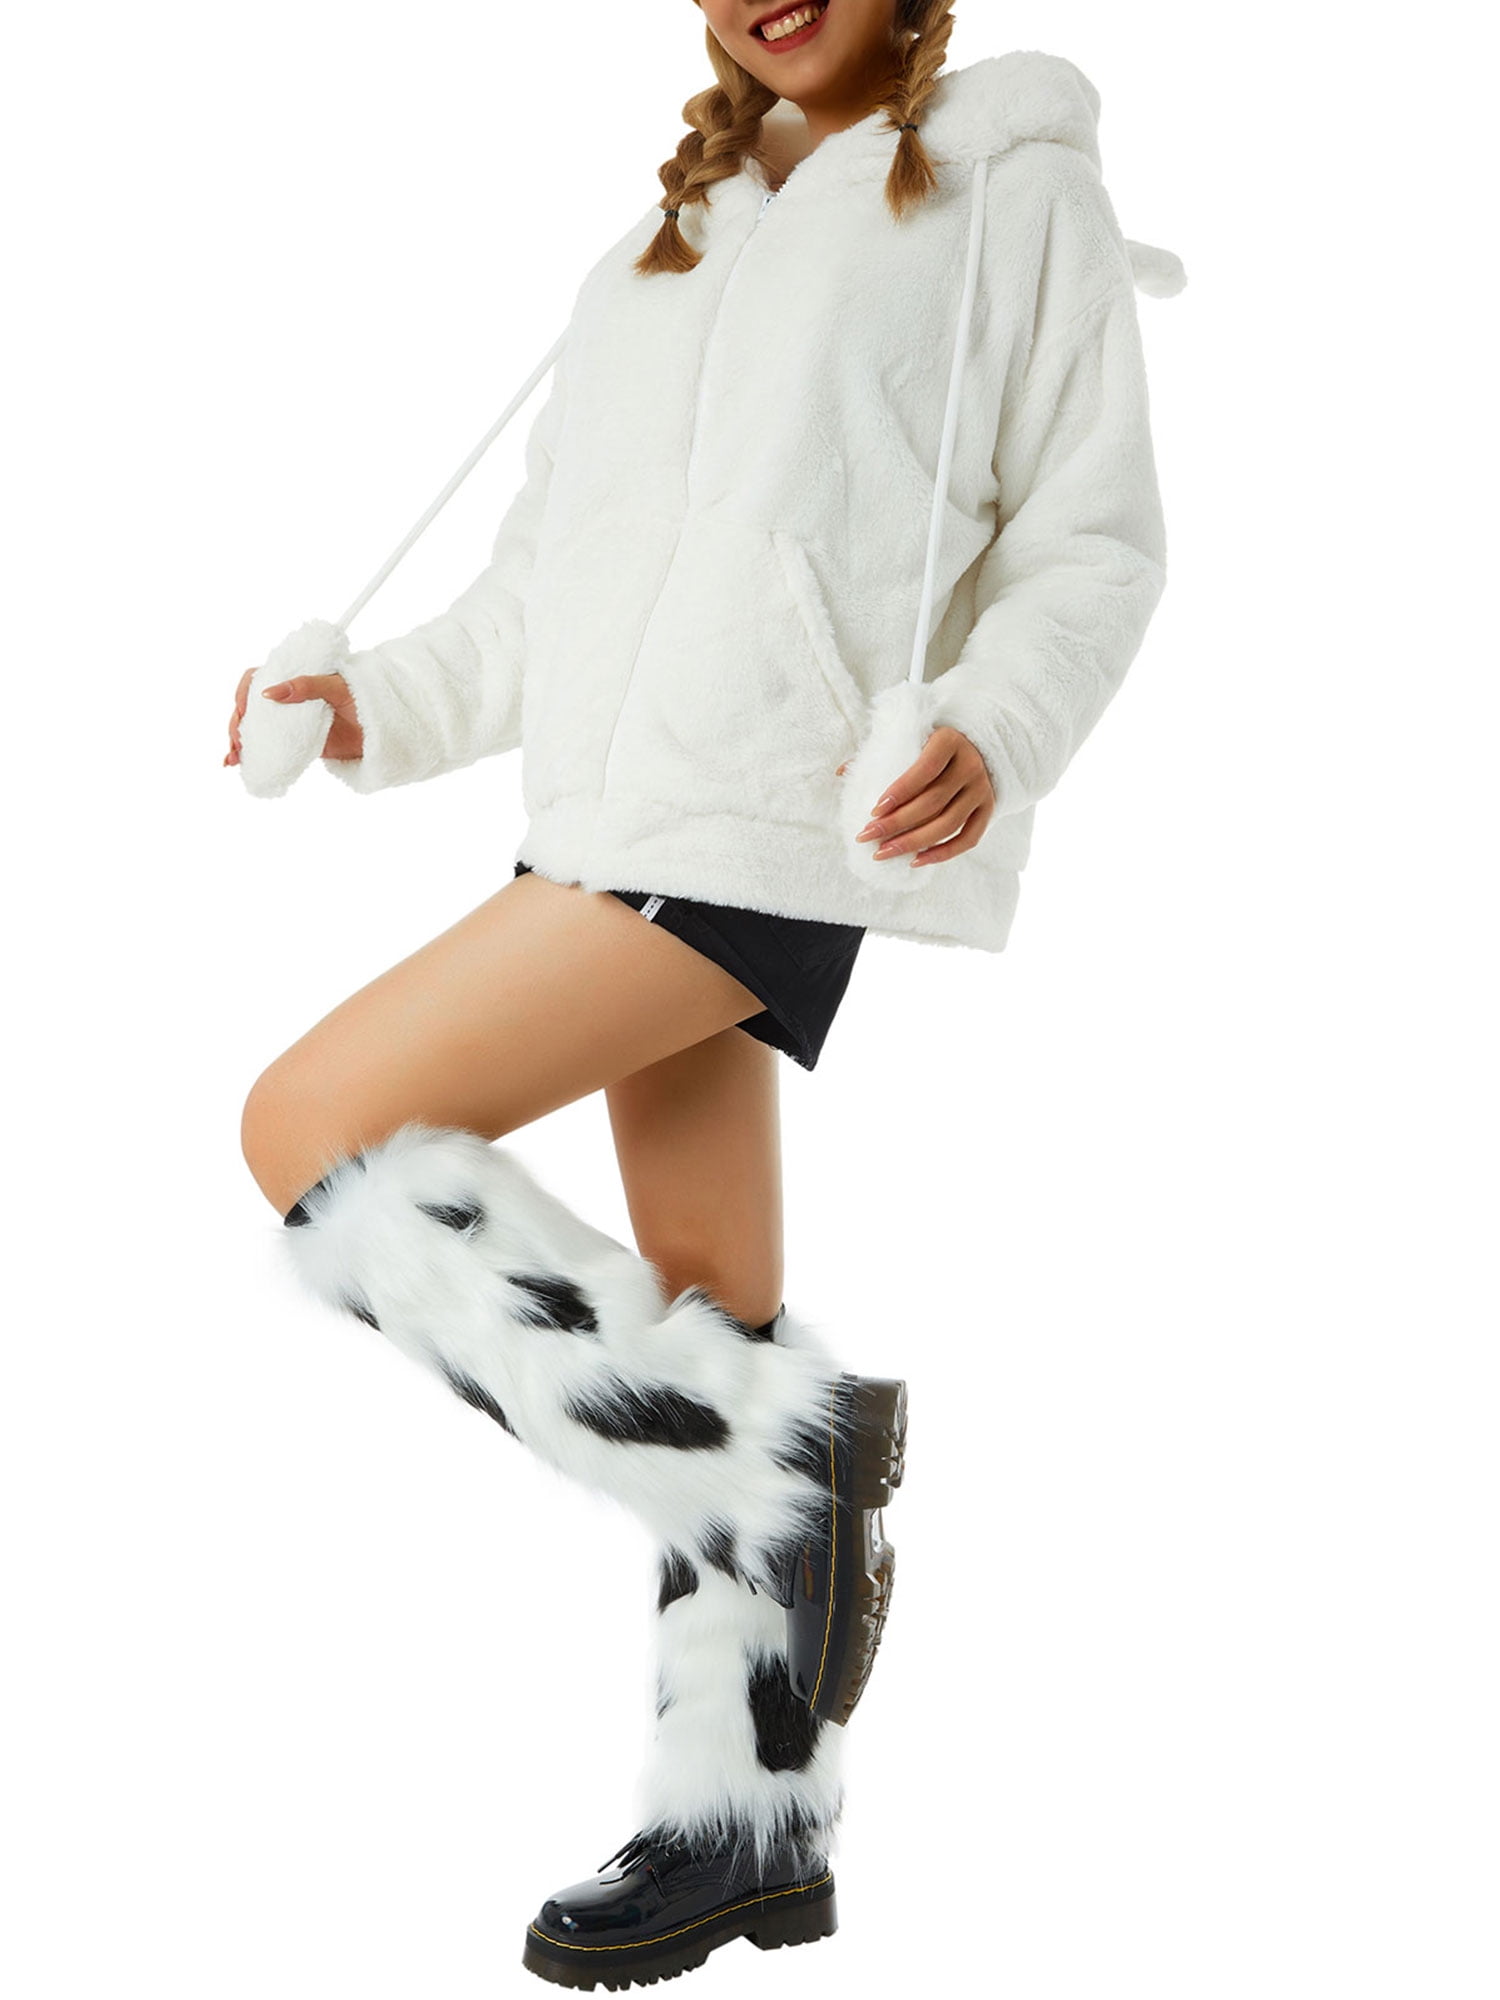 Women Faux Fur Leg Warmers Fuzzy Fur Heels Long Boots Cuffs Cover Elastic Cuff Knee High for Cold Weather 